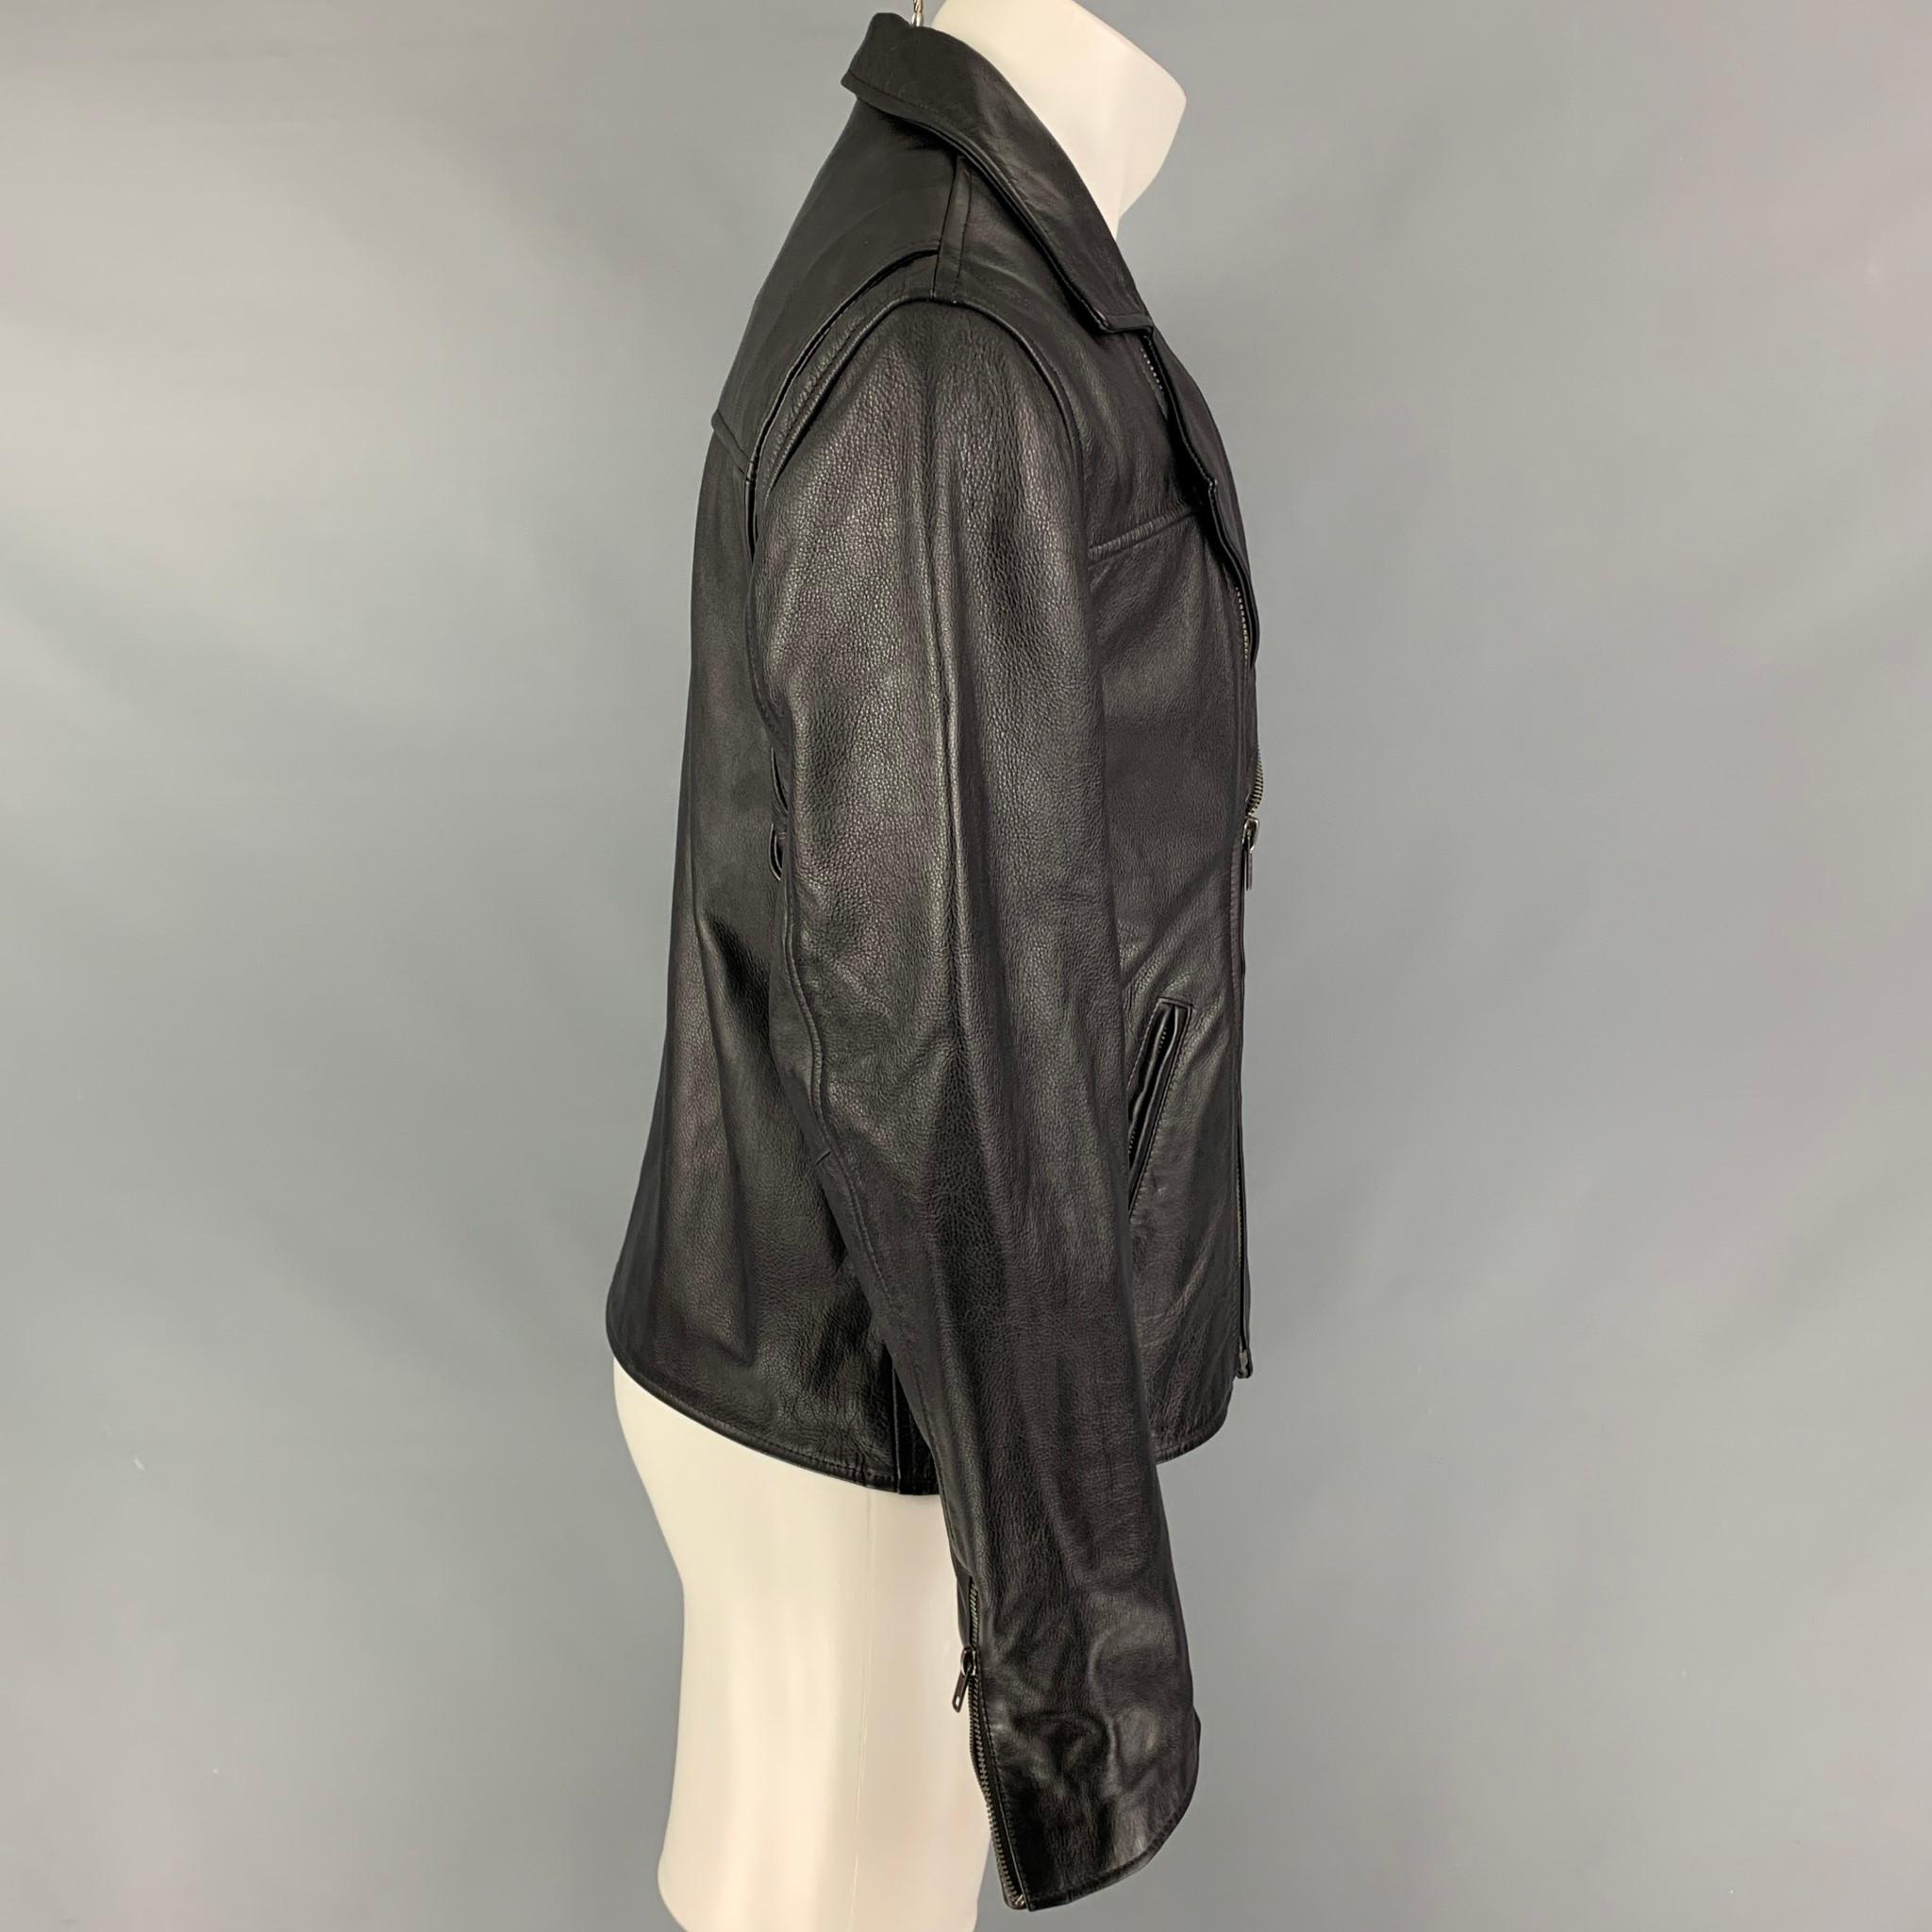 LEVI'S MADE & CRAFTED jacket comes in a black leather featuring a biker style, slit pockets, zipped cuffs, and a zip up closure. Made in Italy. 

New Without Tags. 
Marked: 1

Measurements:

Shoulder: 18.5 in.
Chest: 40 in.
Sleeve: 25 in.
Length: